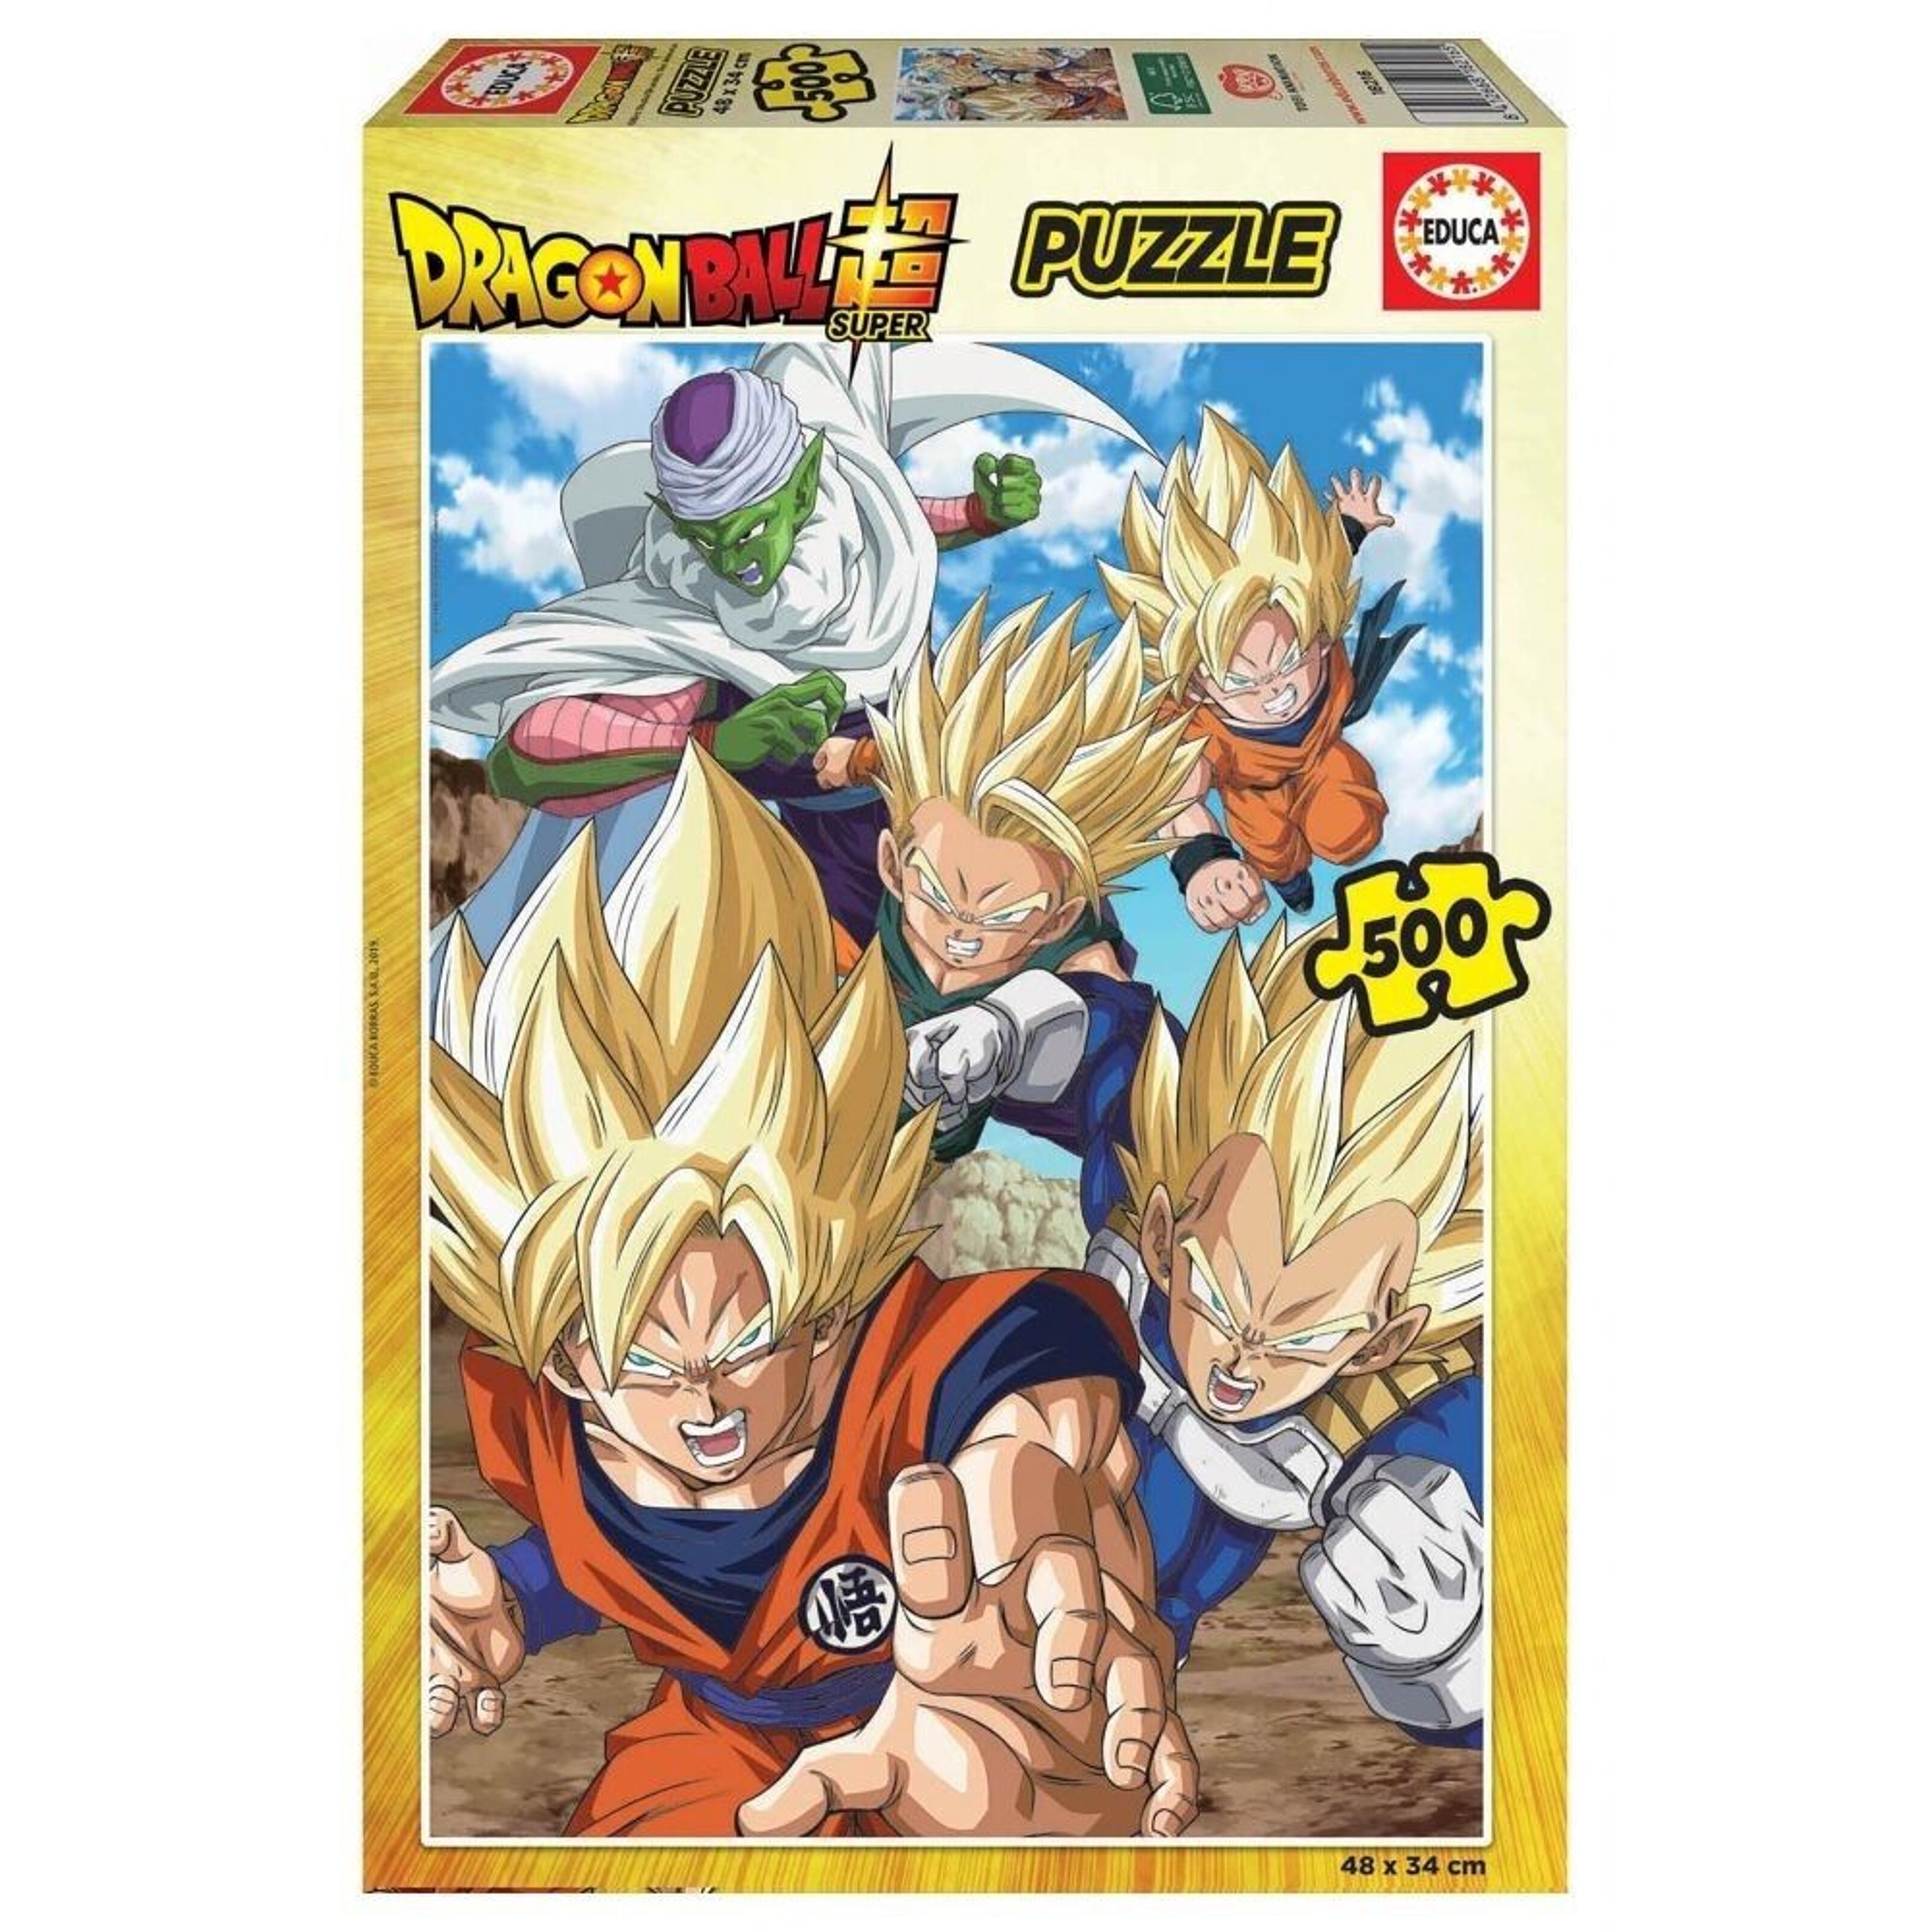 Educa Dragon Ball Z children's Puzzle 200 pieces, from 6 years old (18215)  - AliExpress